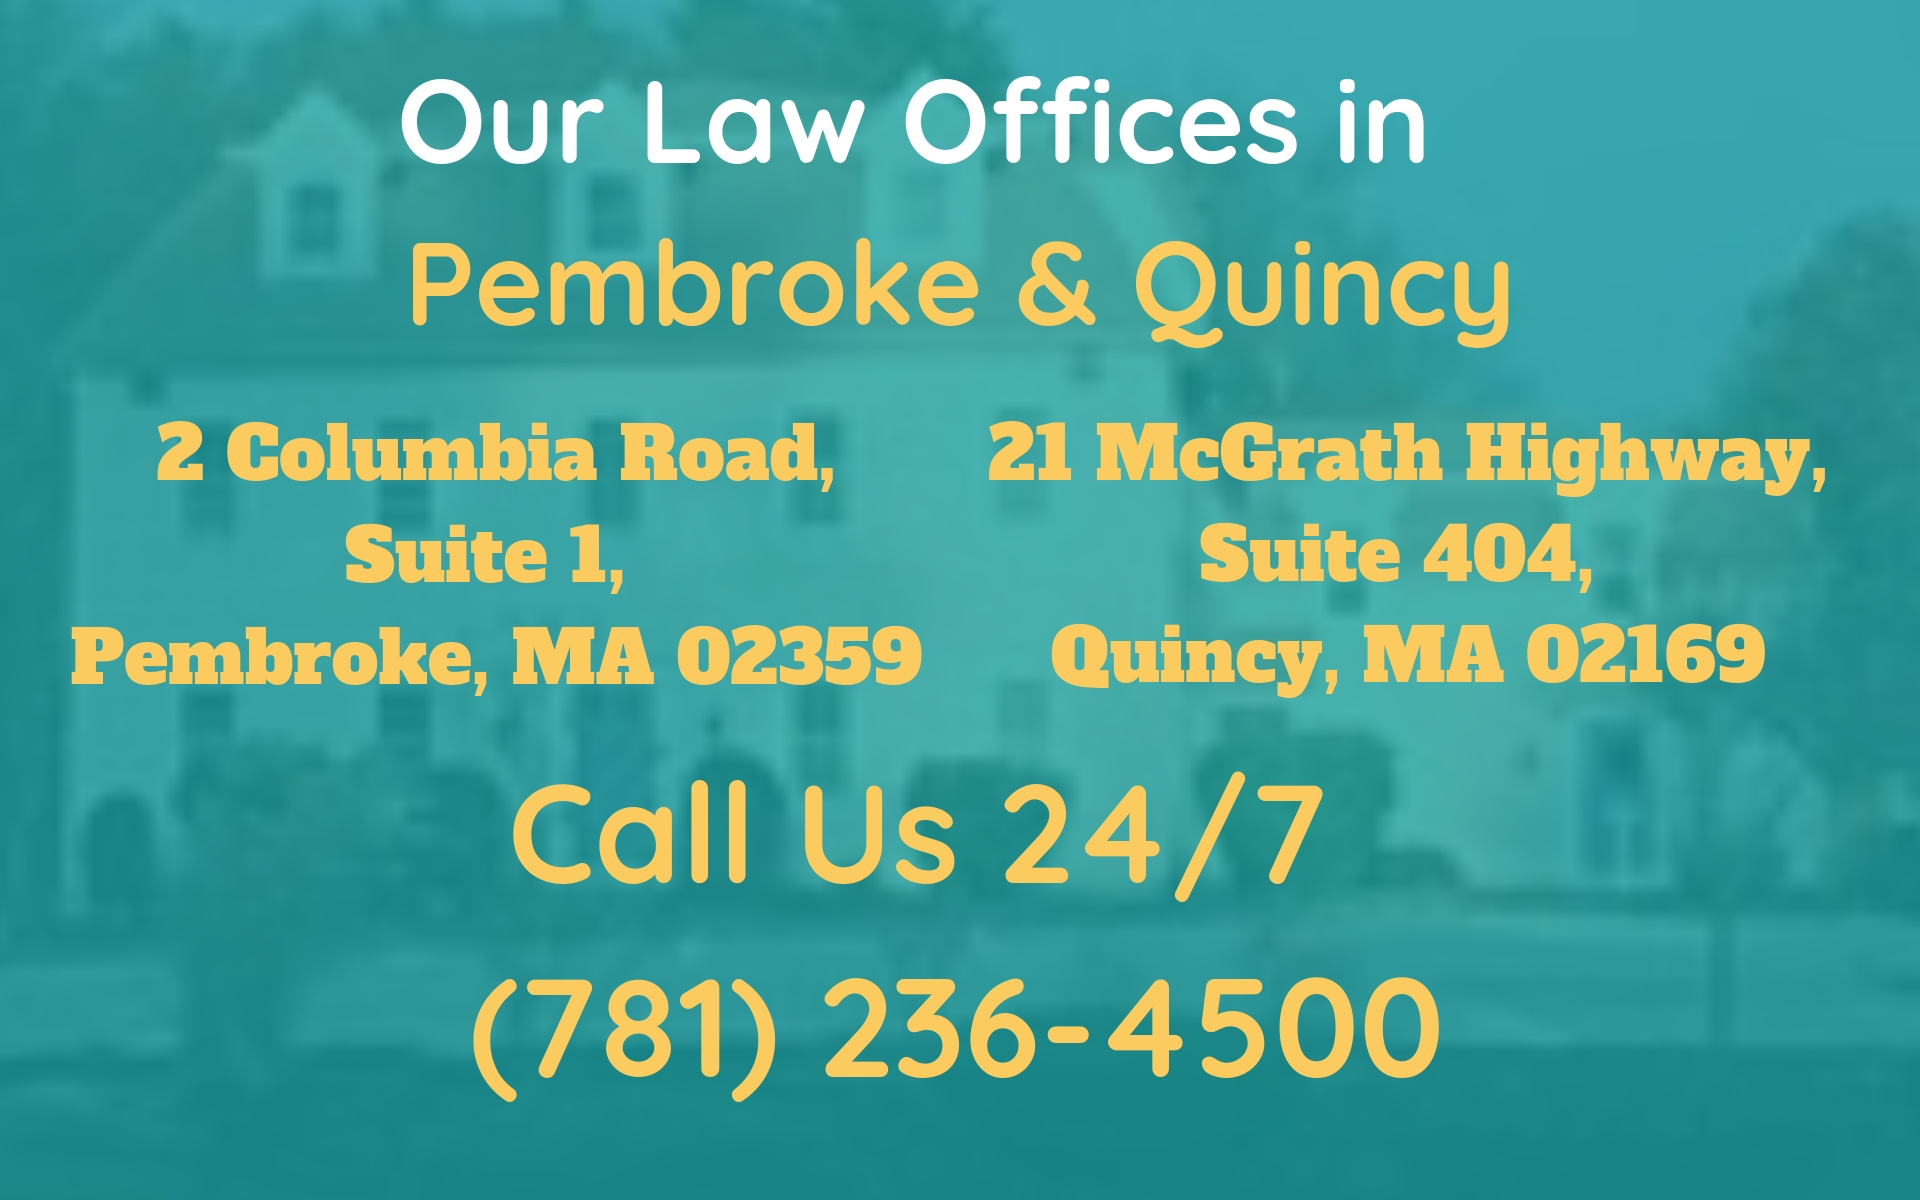 http://Our%20Law%20Office%20In